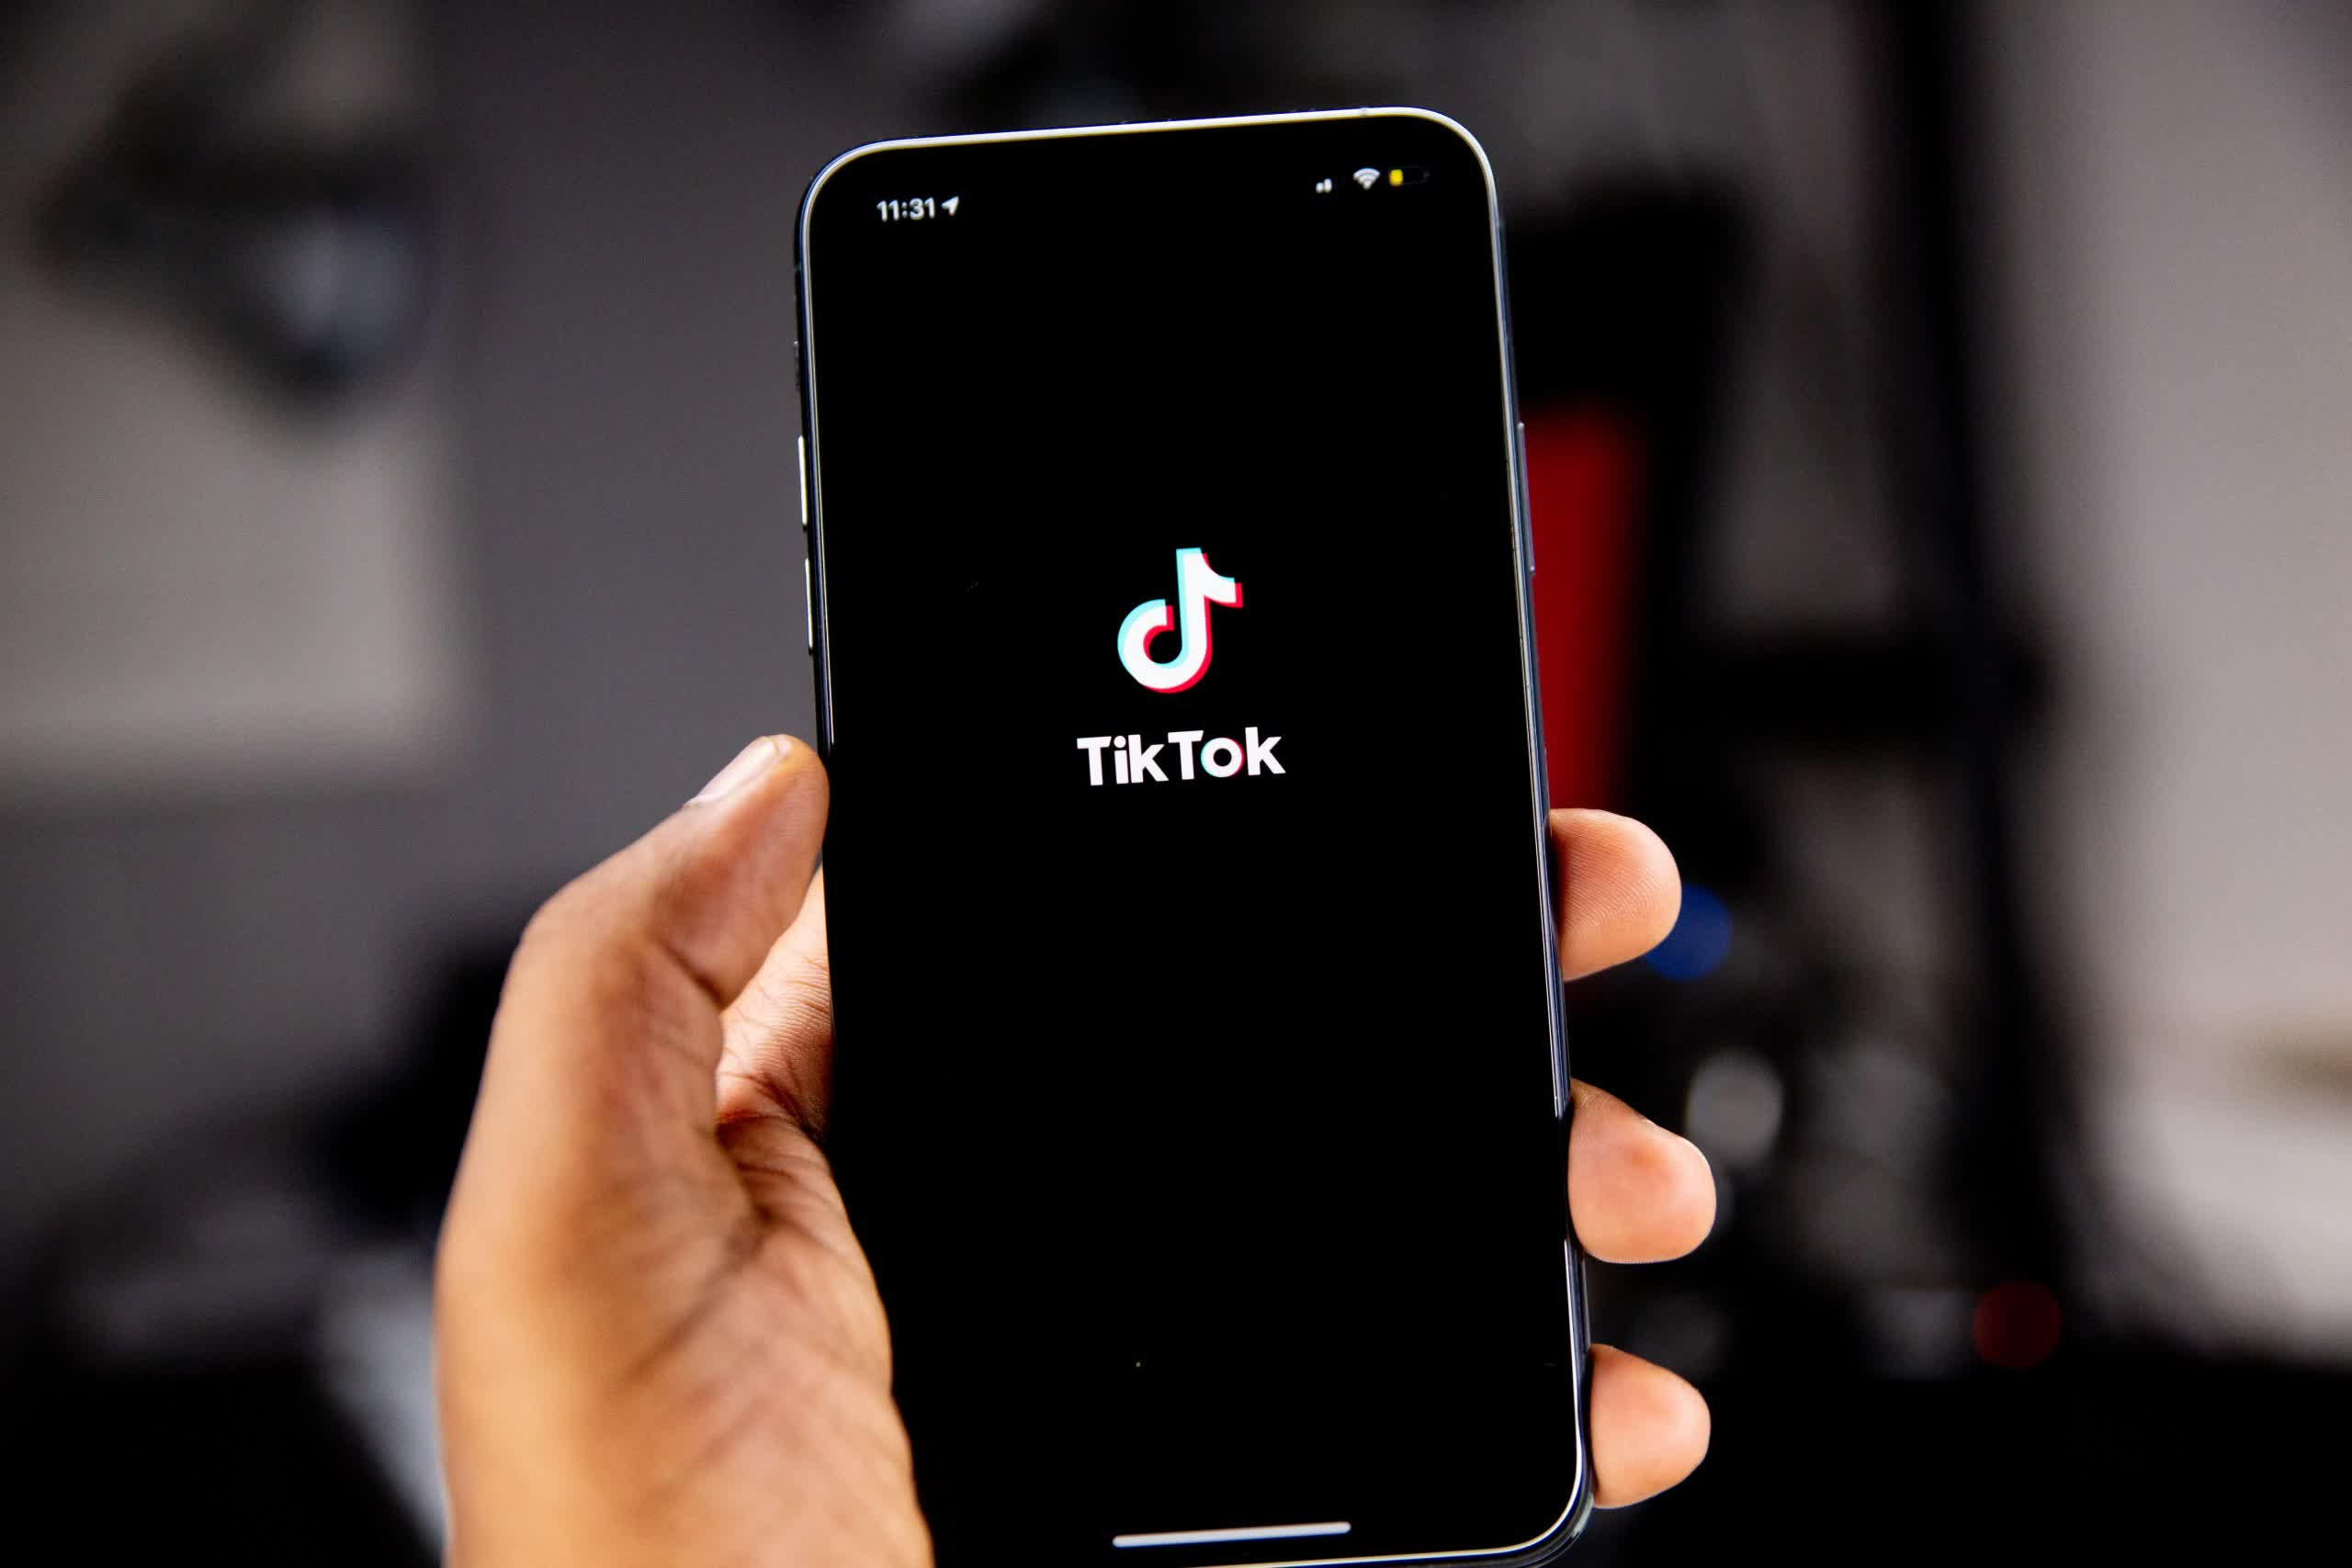 New York City bans TikTok from government devices; poll shows almost 50% of people want total US ban